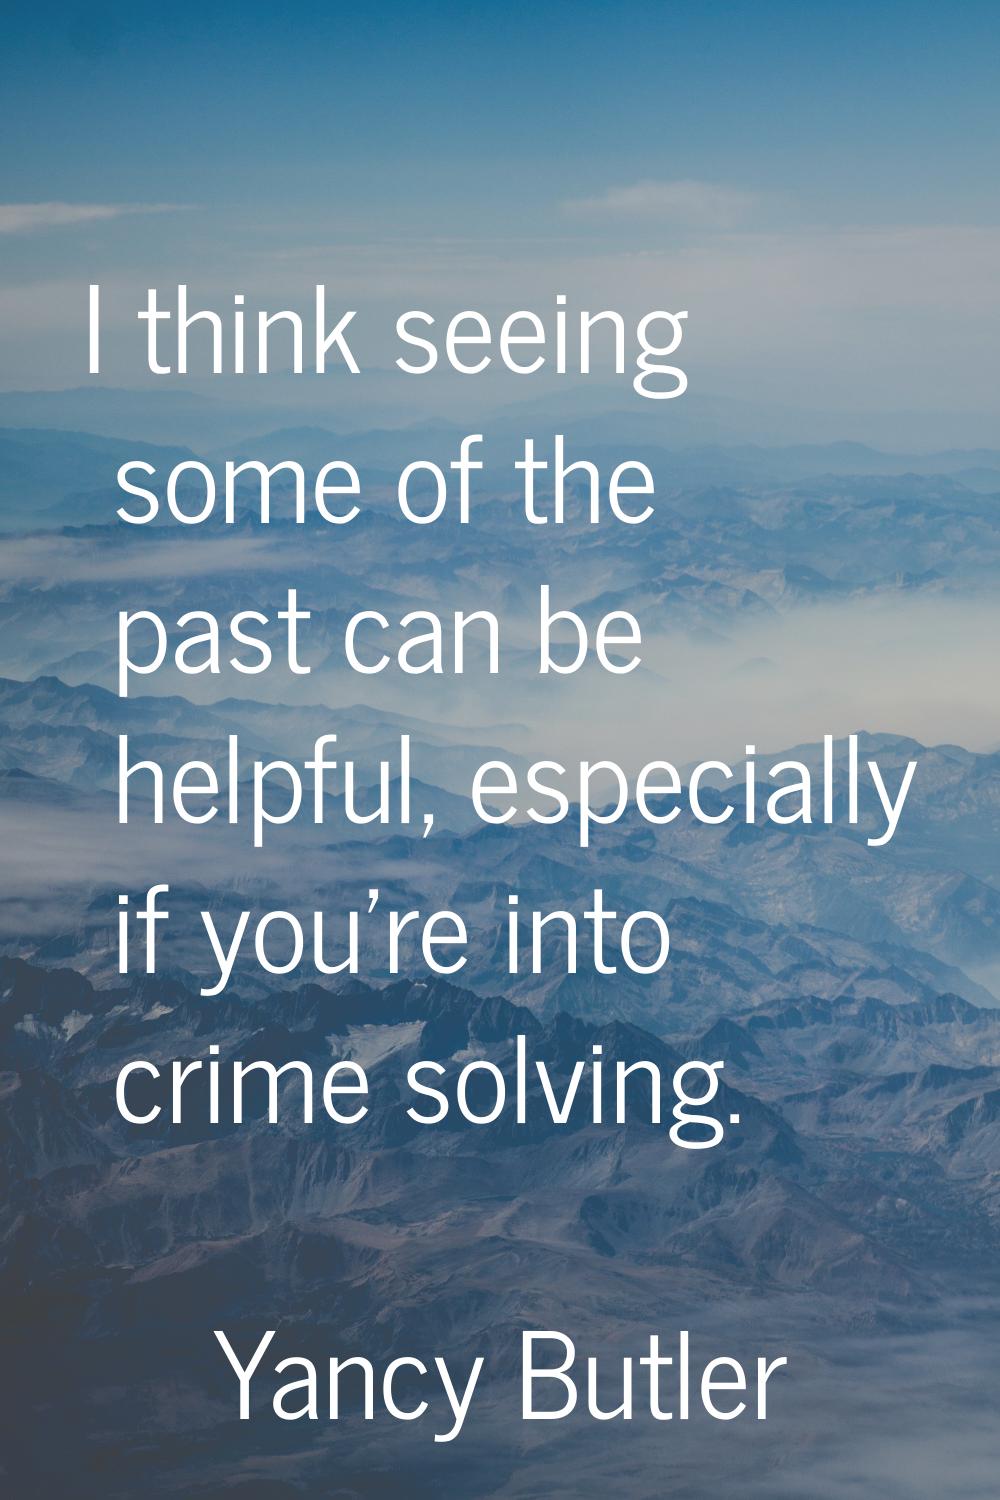 I think seeing some of the past can be helpful, especially if you're into crime solving.